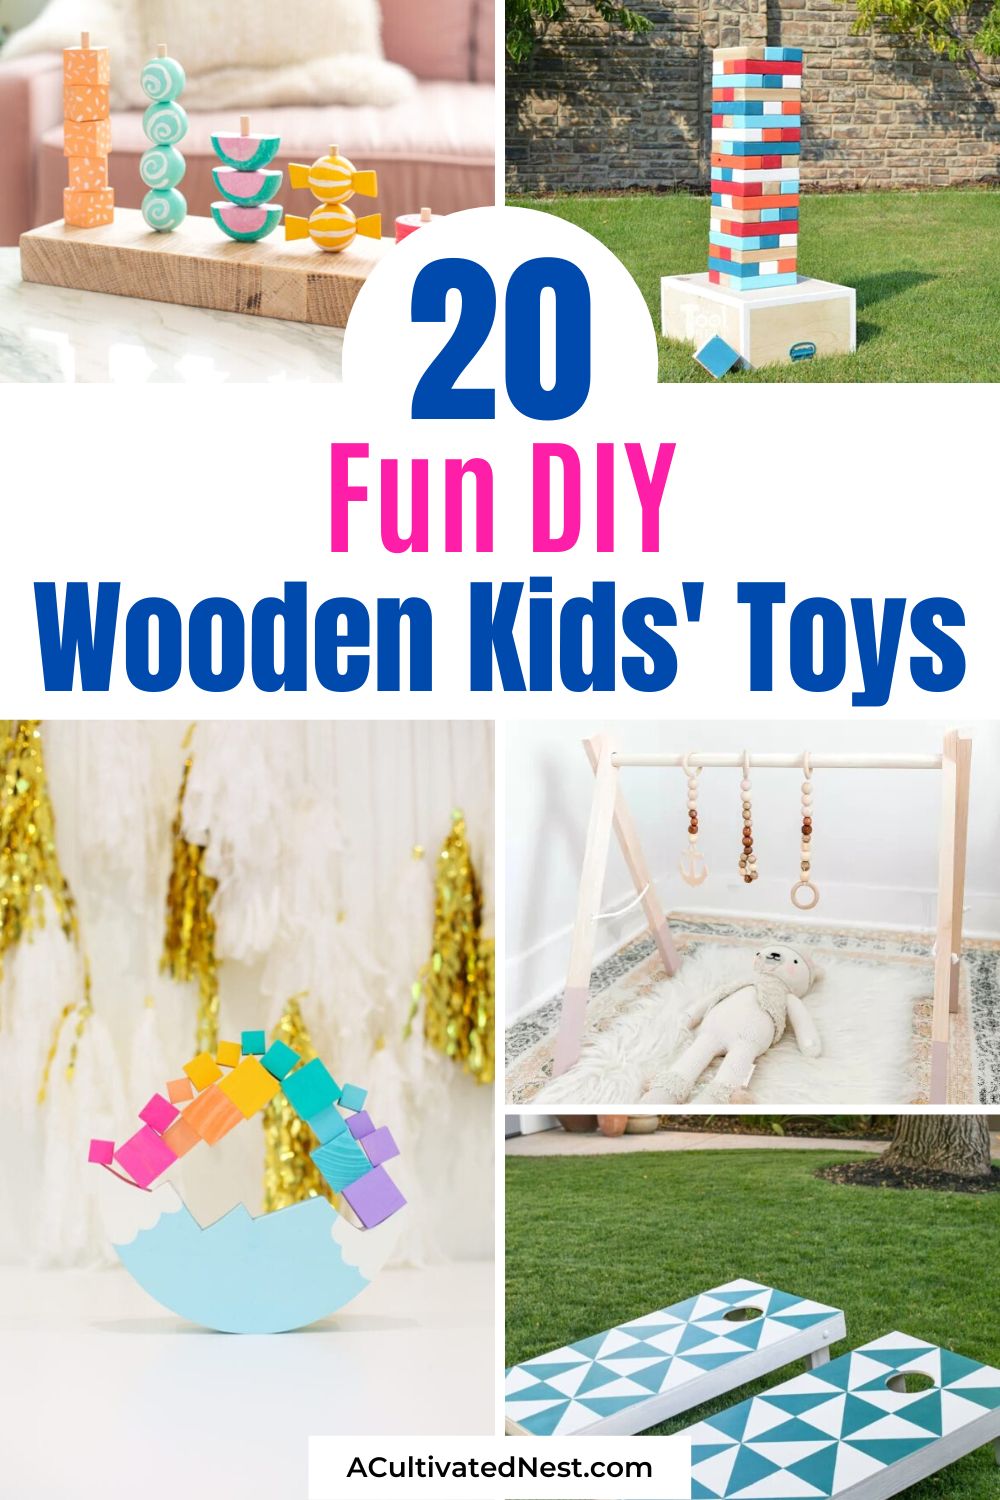 20 Easy DIY Wooden Kids' Toys- Make one of these easy DIY wooden kids' toys to inspire your child to use their imaginations! Wooden toys are easy to make and better for your home! | crafts using scrap wood, homemade kids' toys, #woodCrafts #DIYs #DIYKidsToys #woodenToys #ACultivatedNest